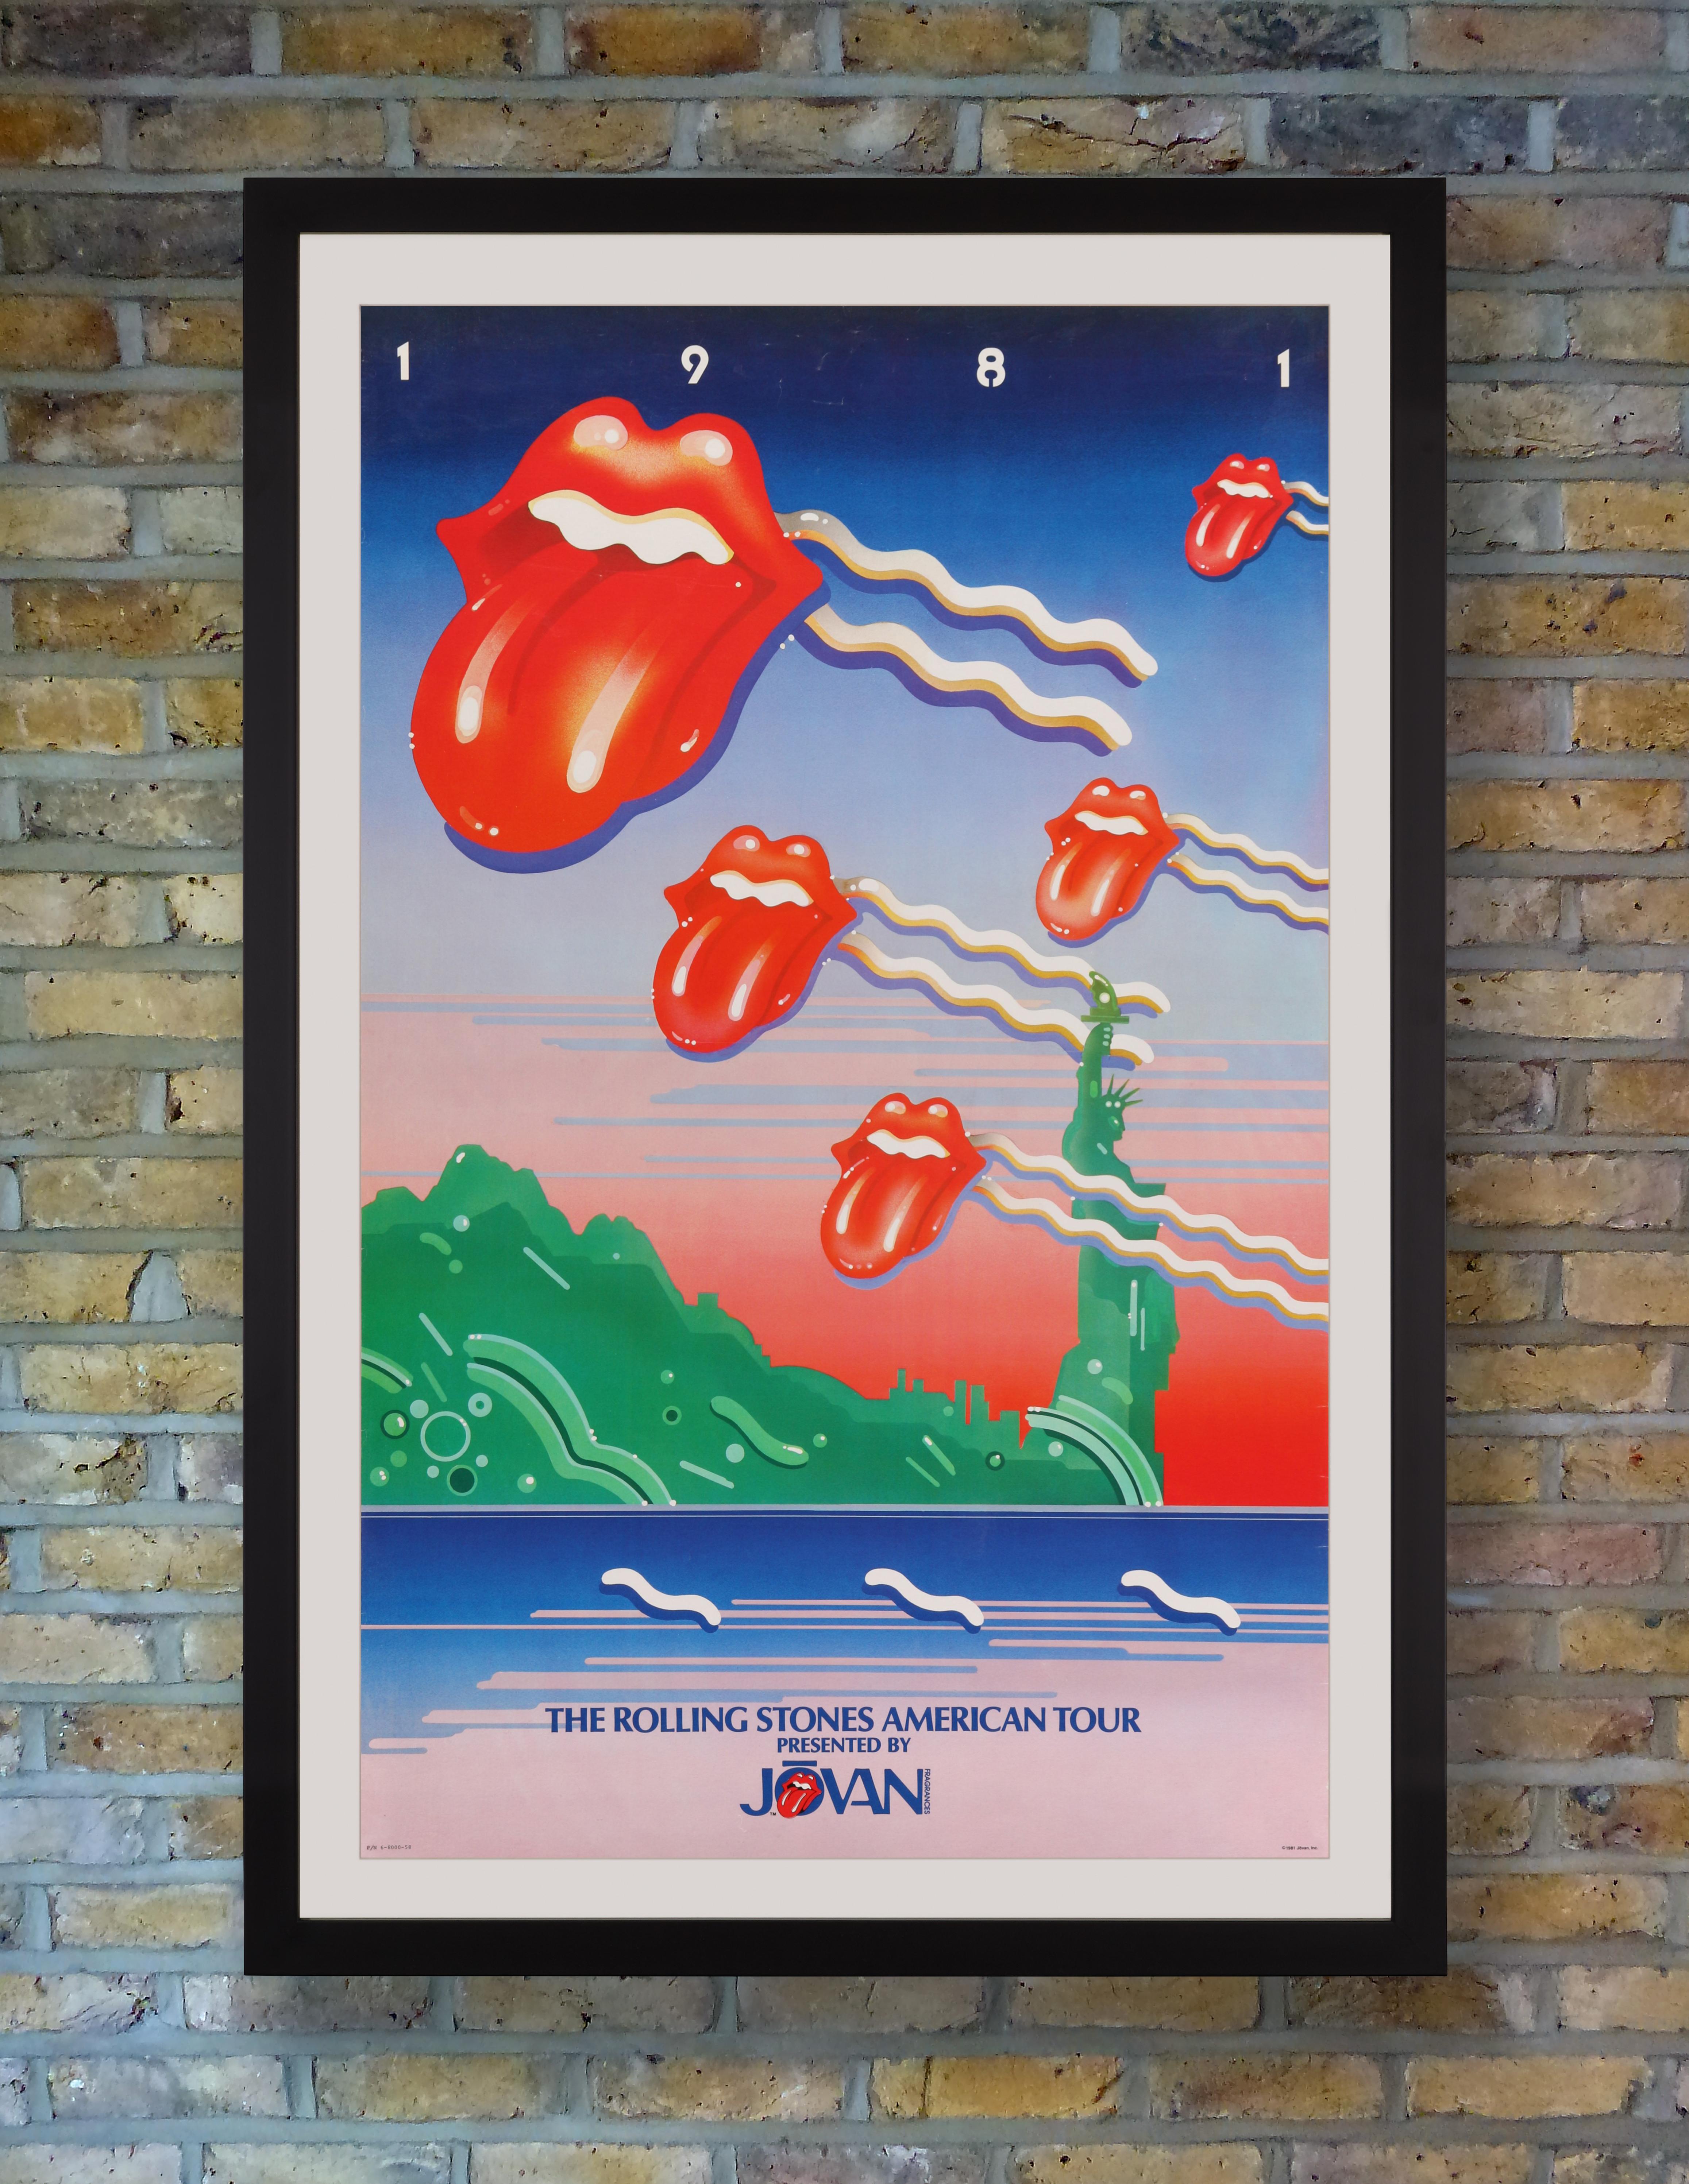 A promotional poster advertising the Rolling Stones 1981 American Tour in association with Jovan Fragrances. Jovan bought exclusive rights as official tour sponsor for a reported $3 million.